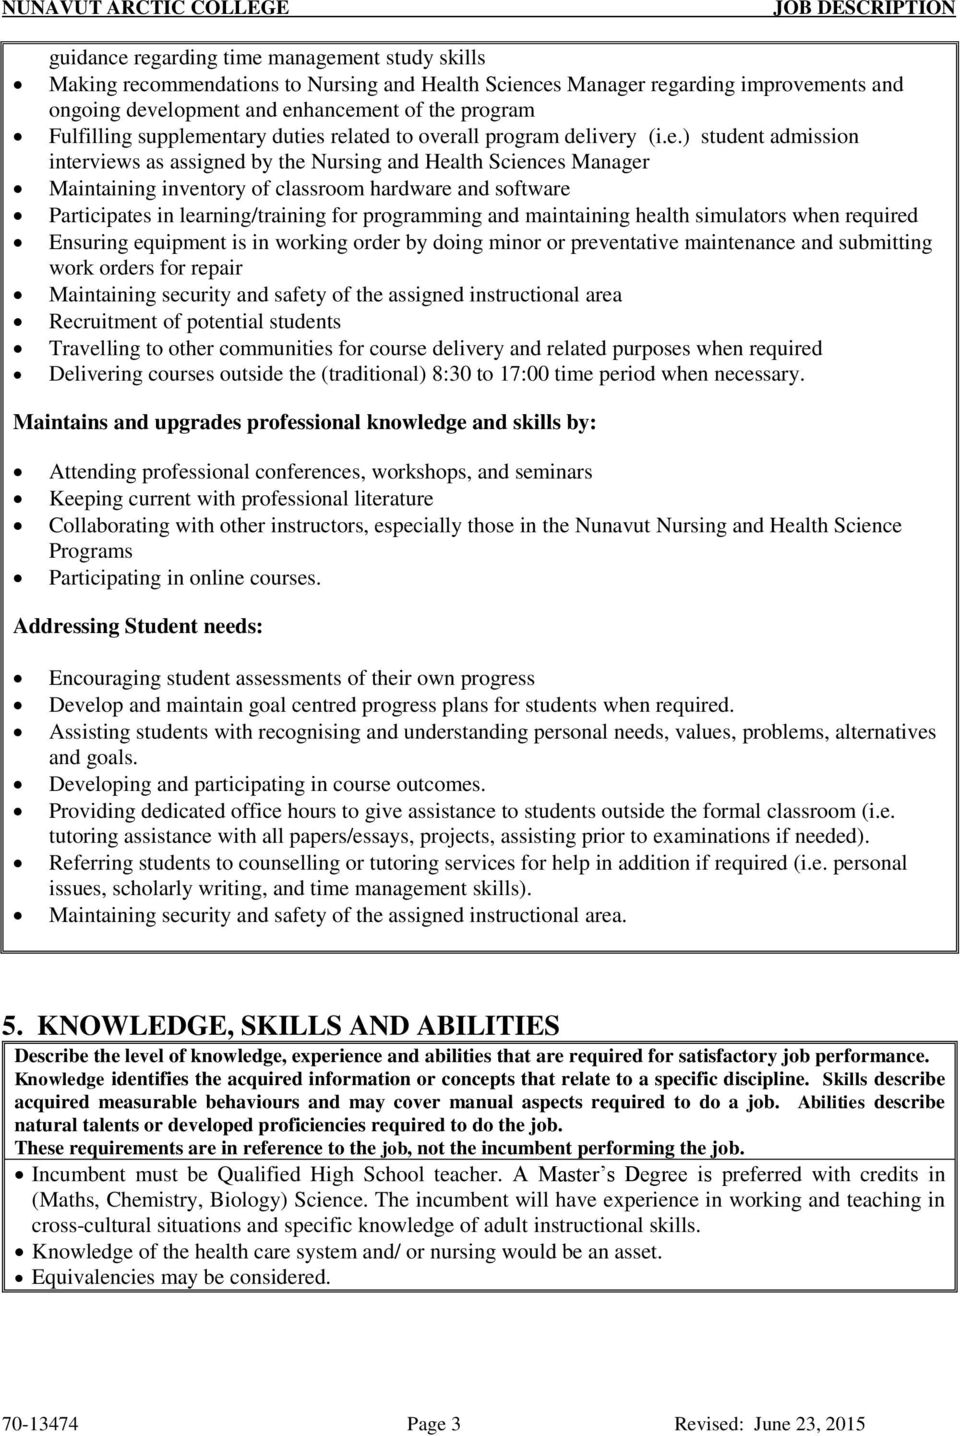 entary duties related to overall program delivery (i.e.) student admission interviews as assigned by the Nursing and Health Sciences Manager Maintaining inventory of classroom hardware and software